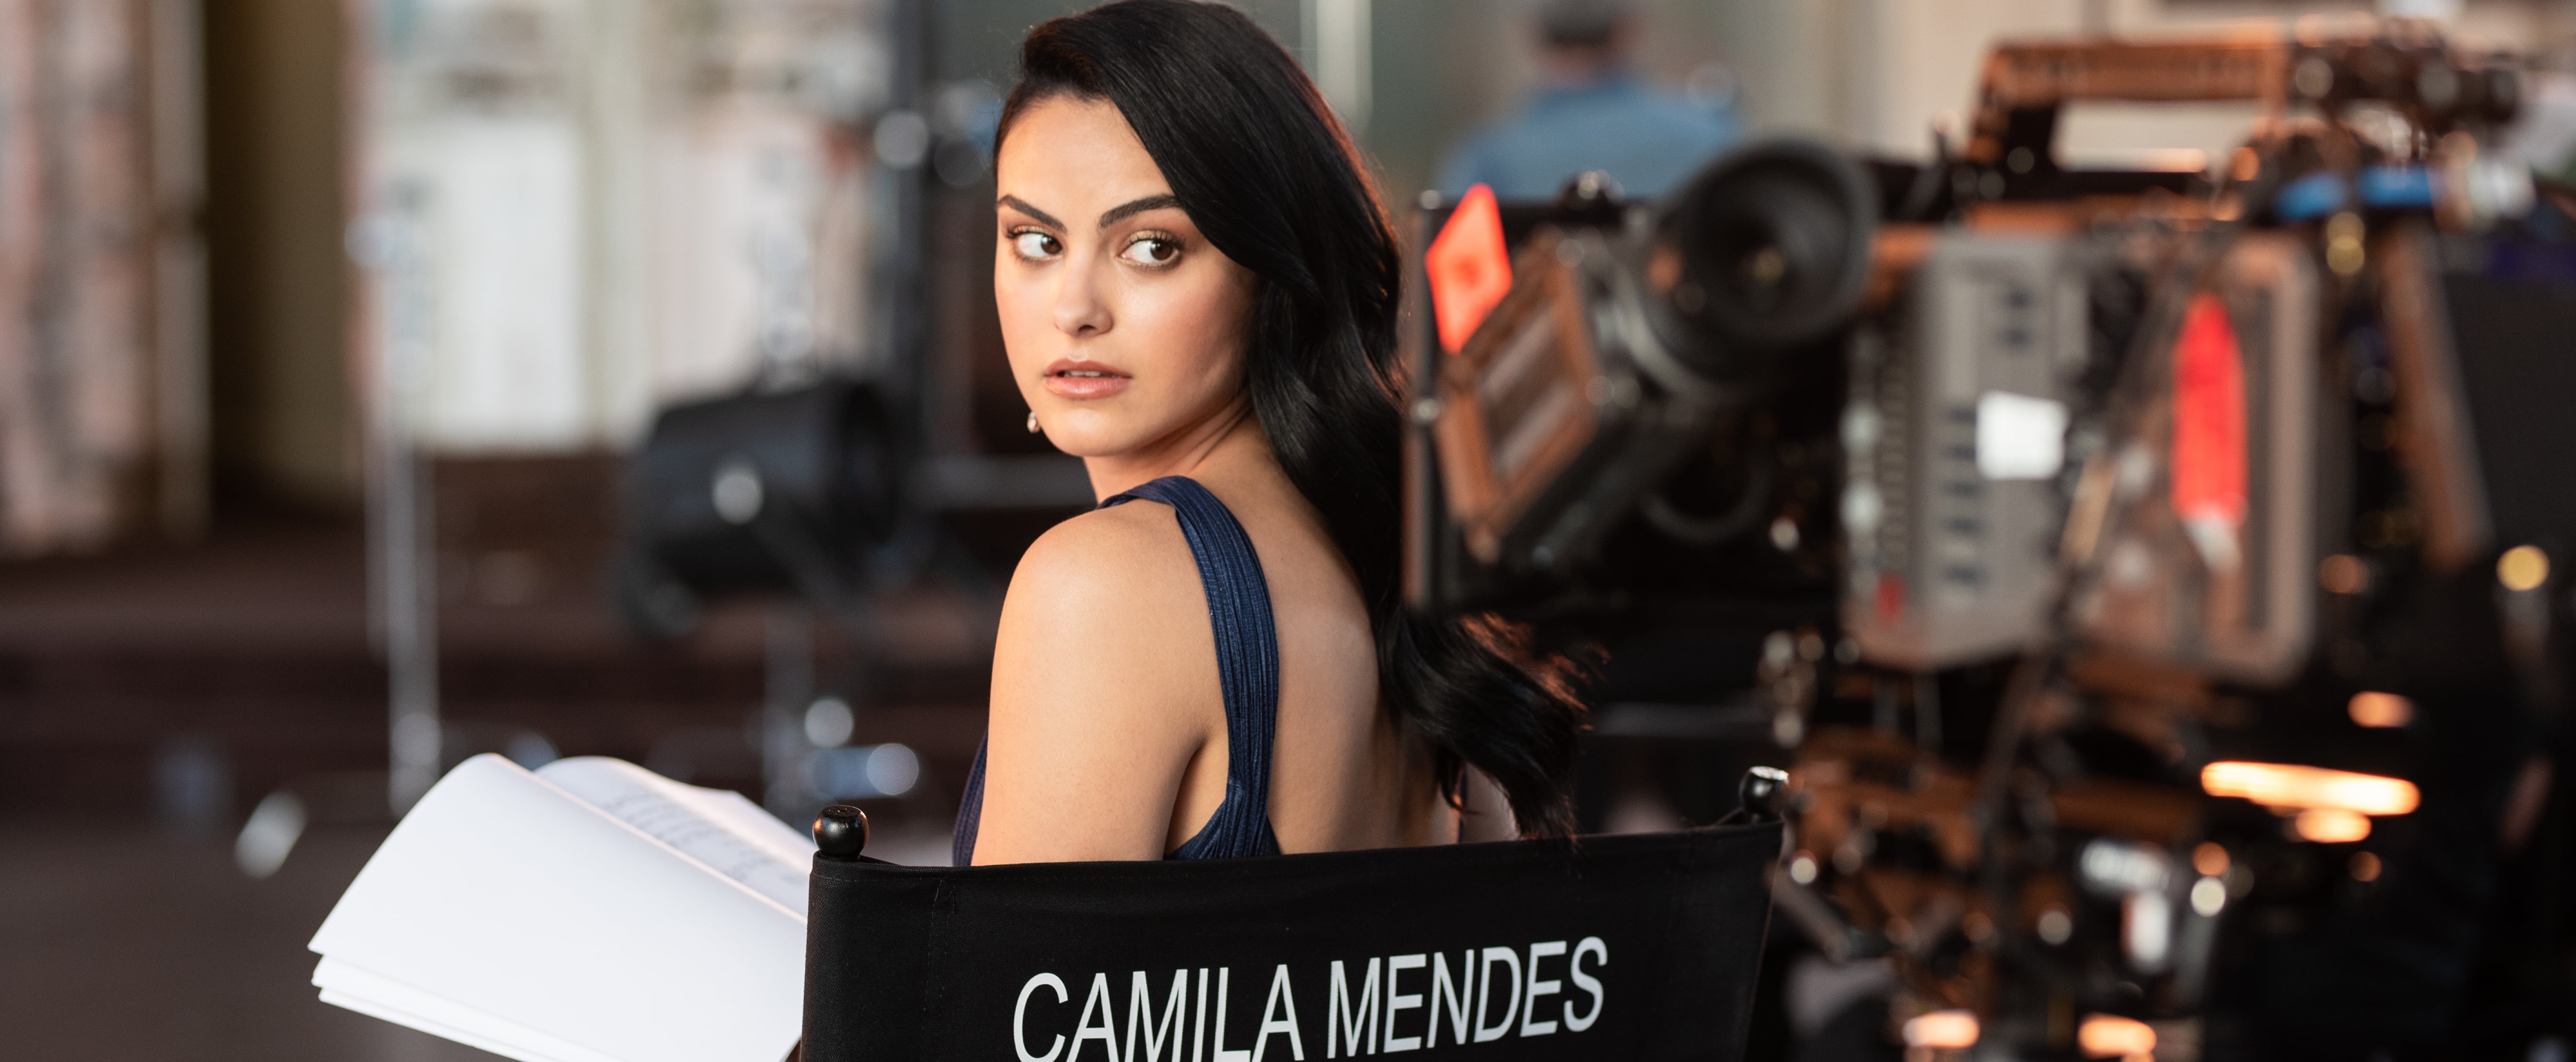 Camila Mendes Talks About Playing Veronica On Riverdale Popsugar Entertainment 0523